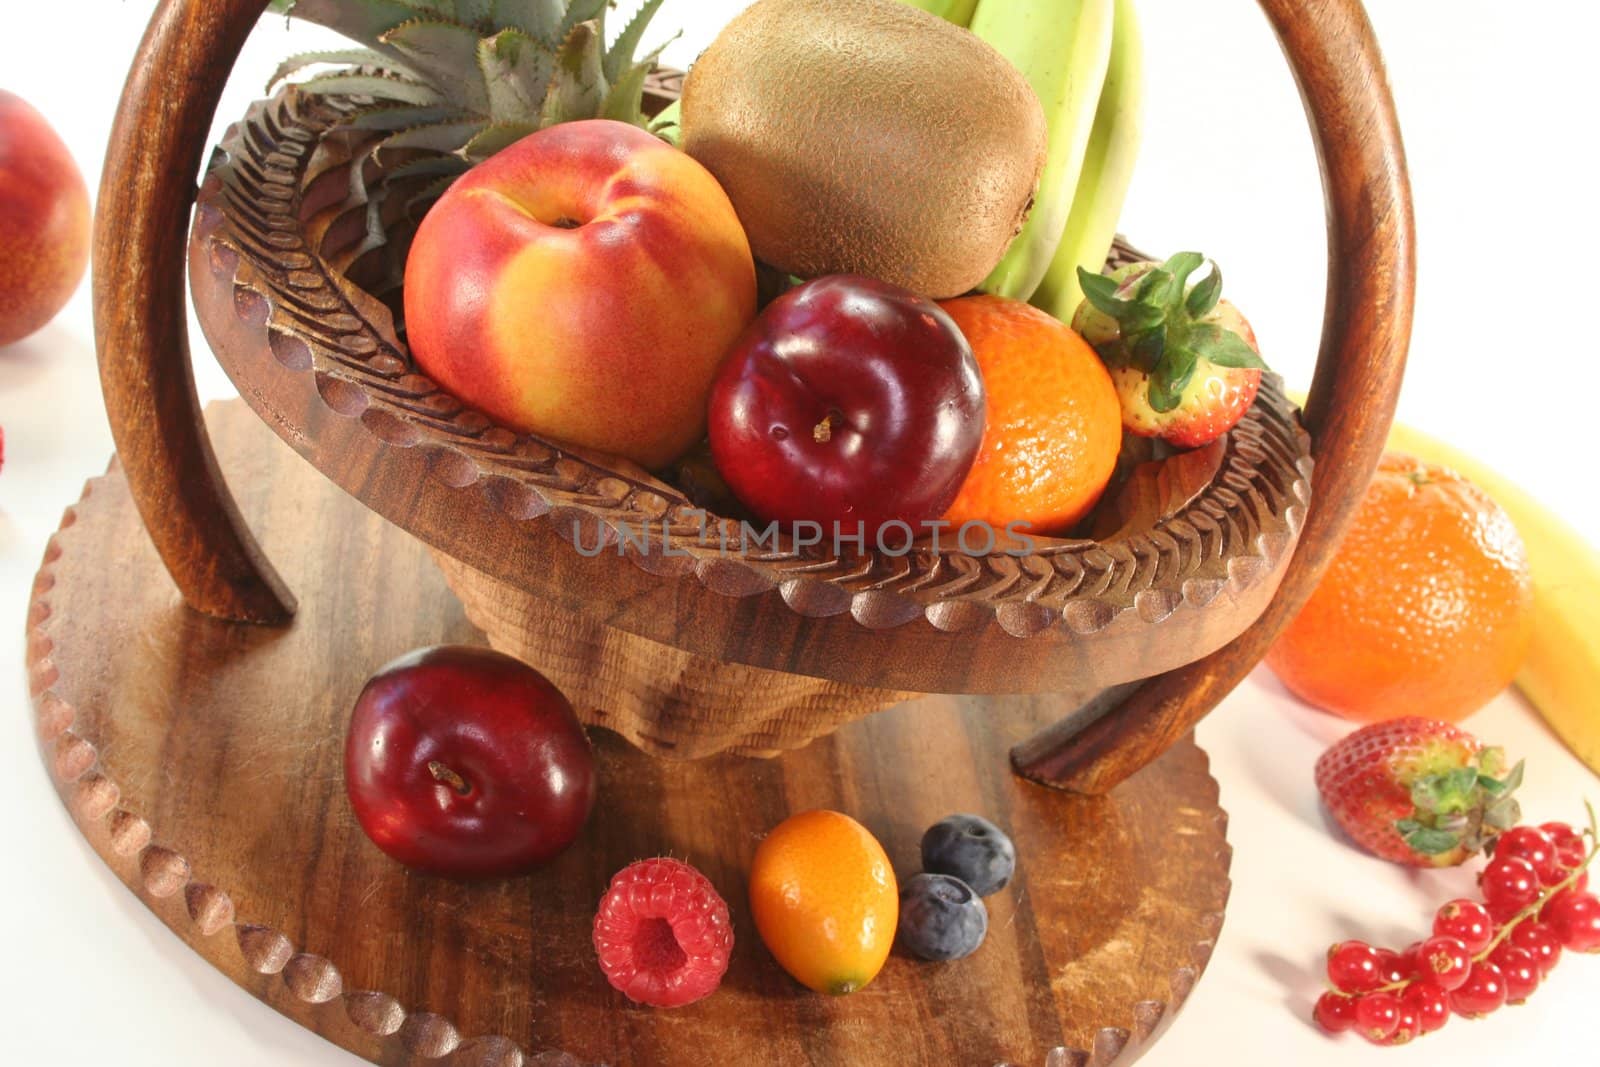 Mix of native and exotic fruits in a wooden basket